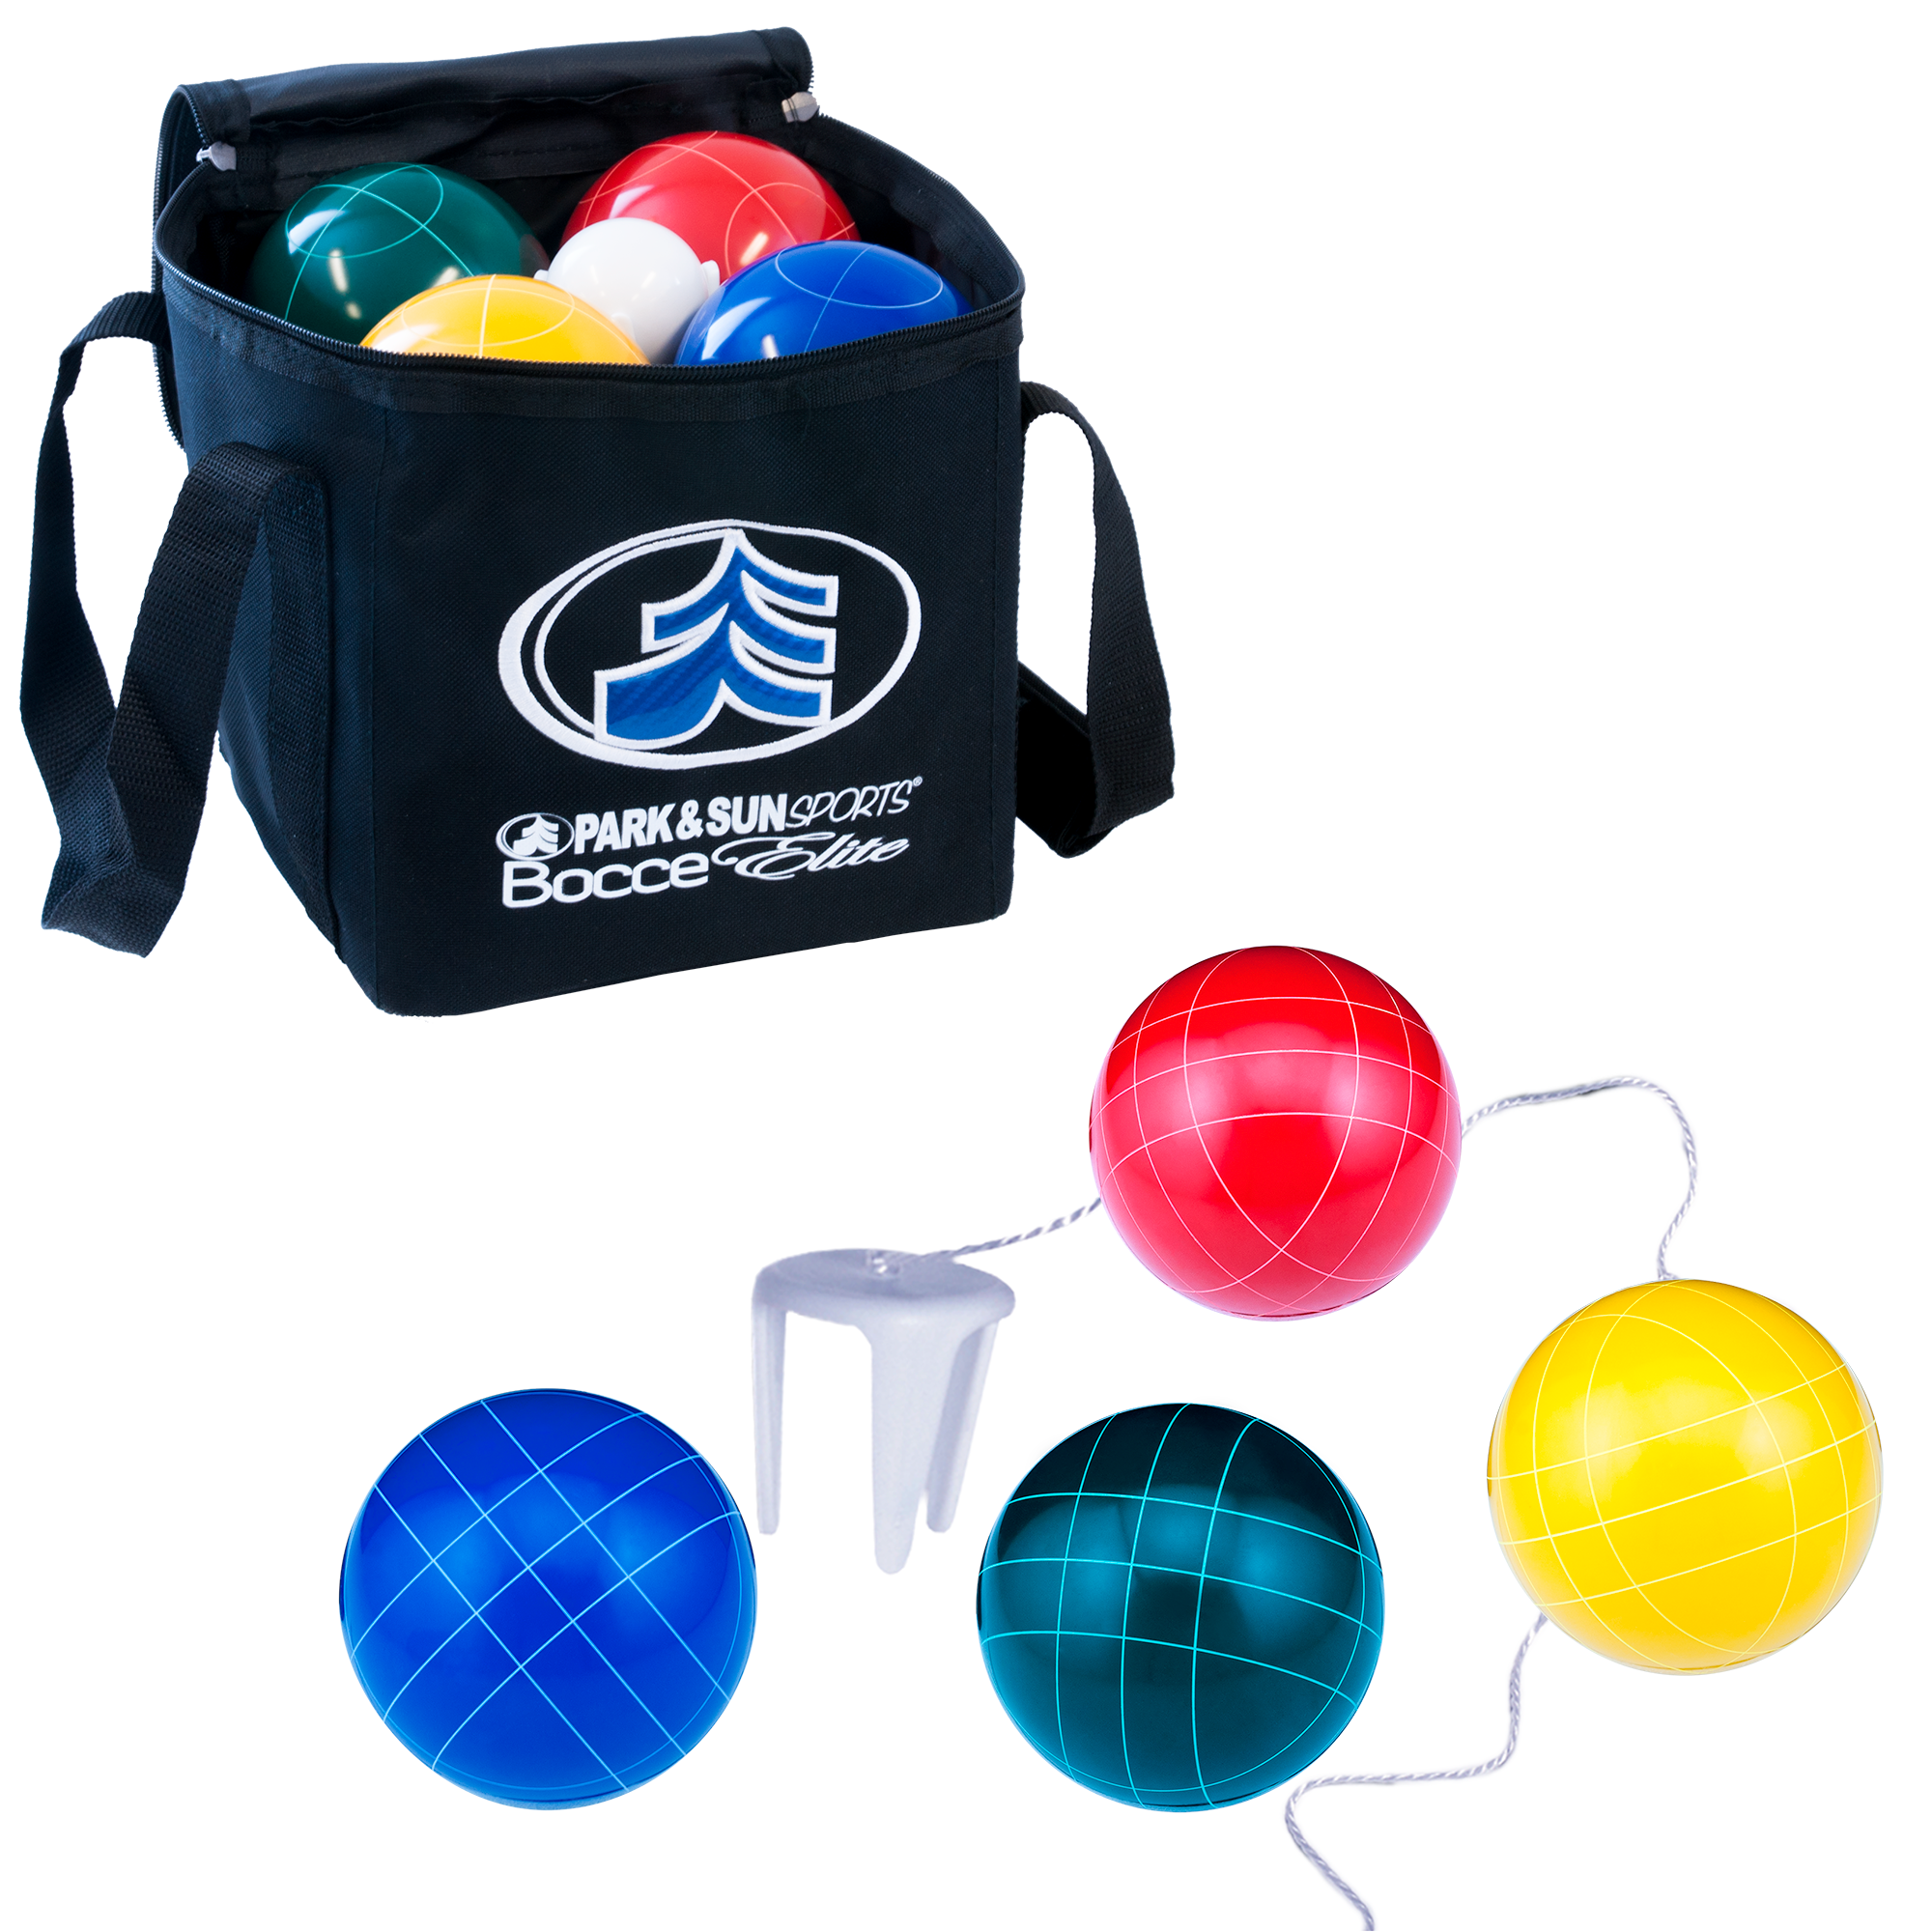 Bocce ELite set with 107 mm bocce balls